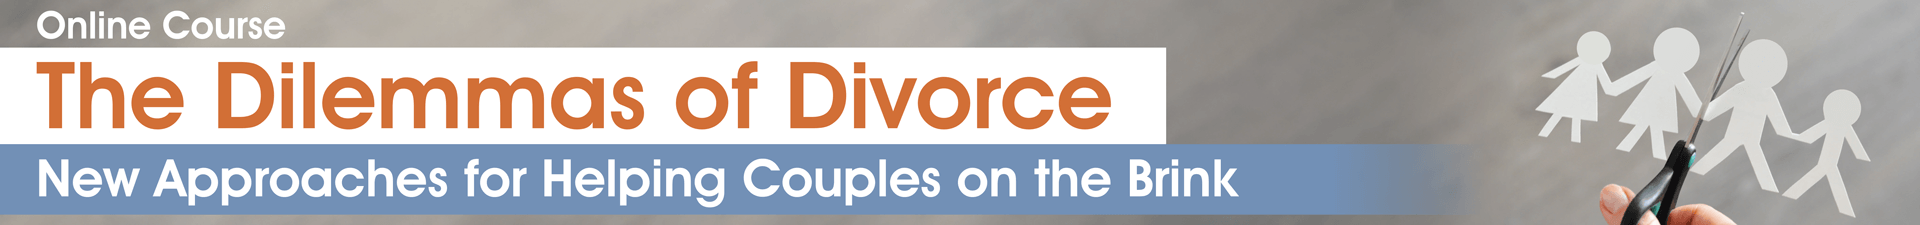 William Doherty, Terry Real, Tammy Nelson, and more! – The Dilemmas of Divorce – NAFHCOTB (1)